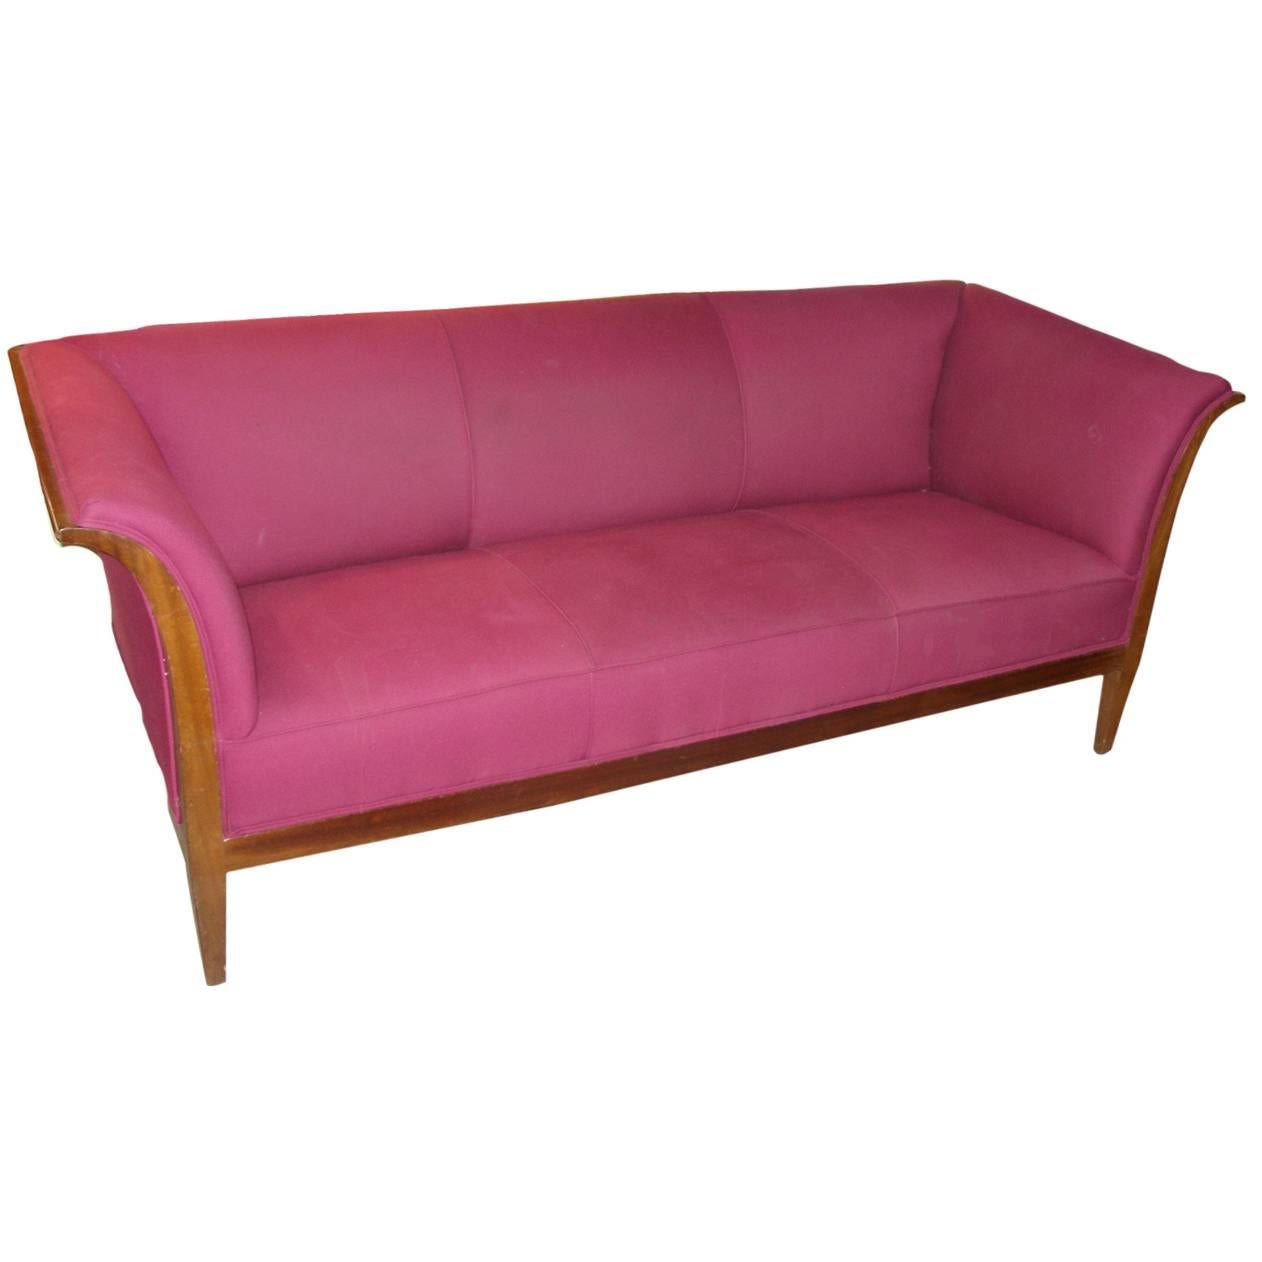 1940s Classical Style Sofa by Frits Henningsen For Sale